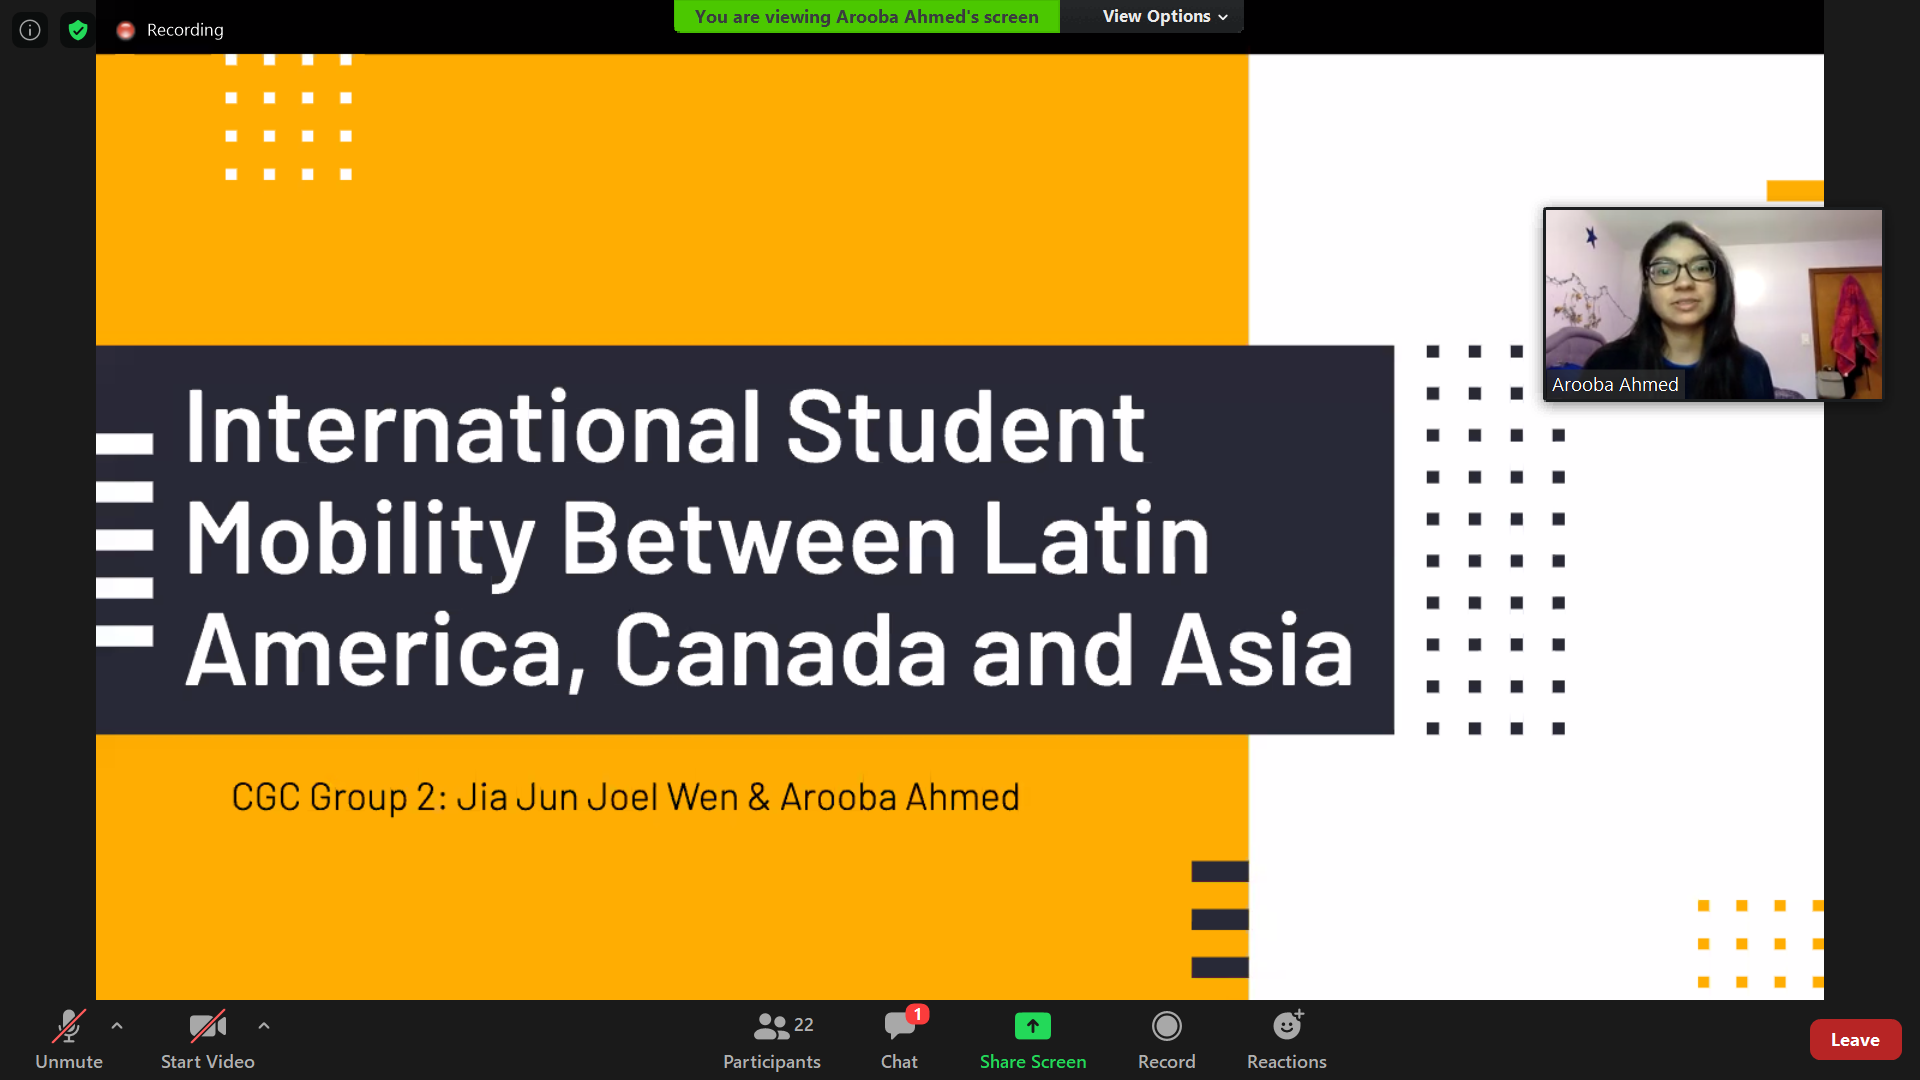 Arooba Ahmed presenting through Zoom on International Student Mobility Between Latin America, Canada, and Asia